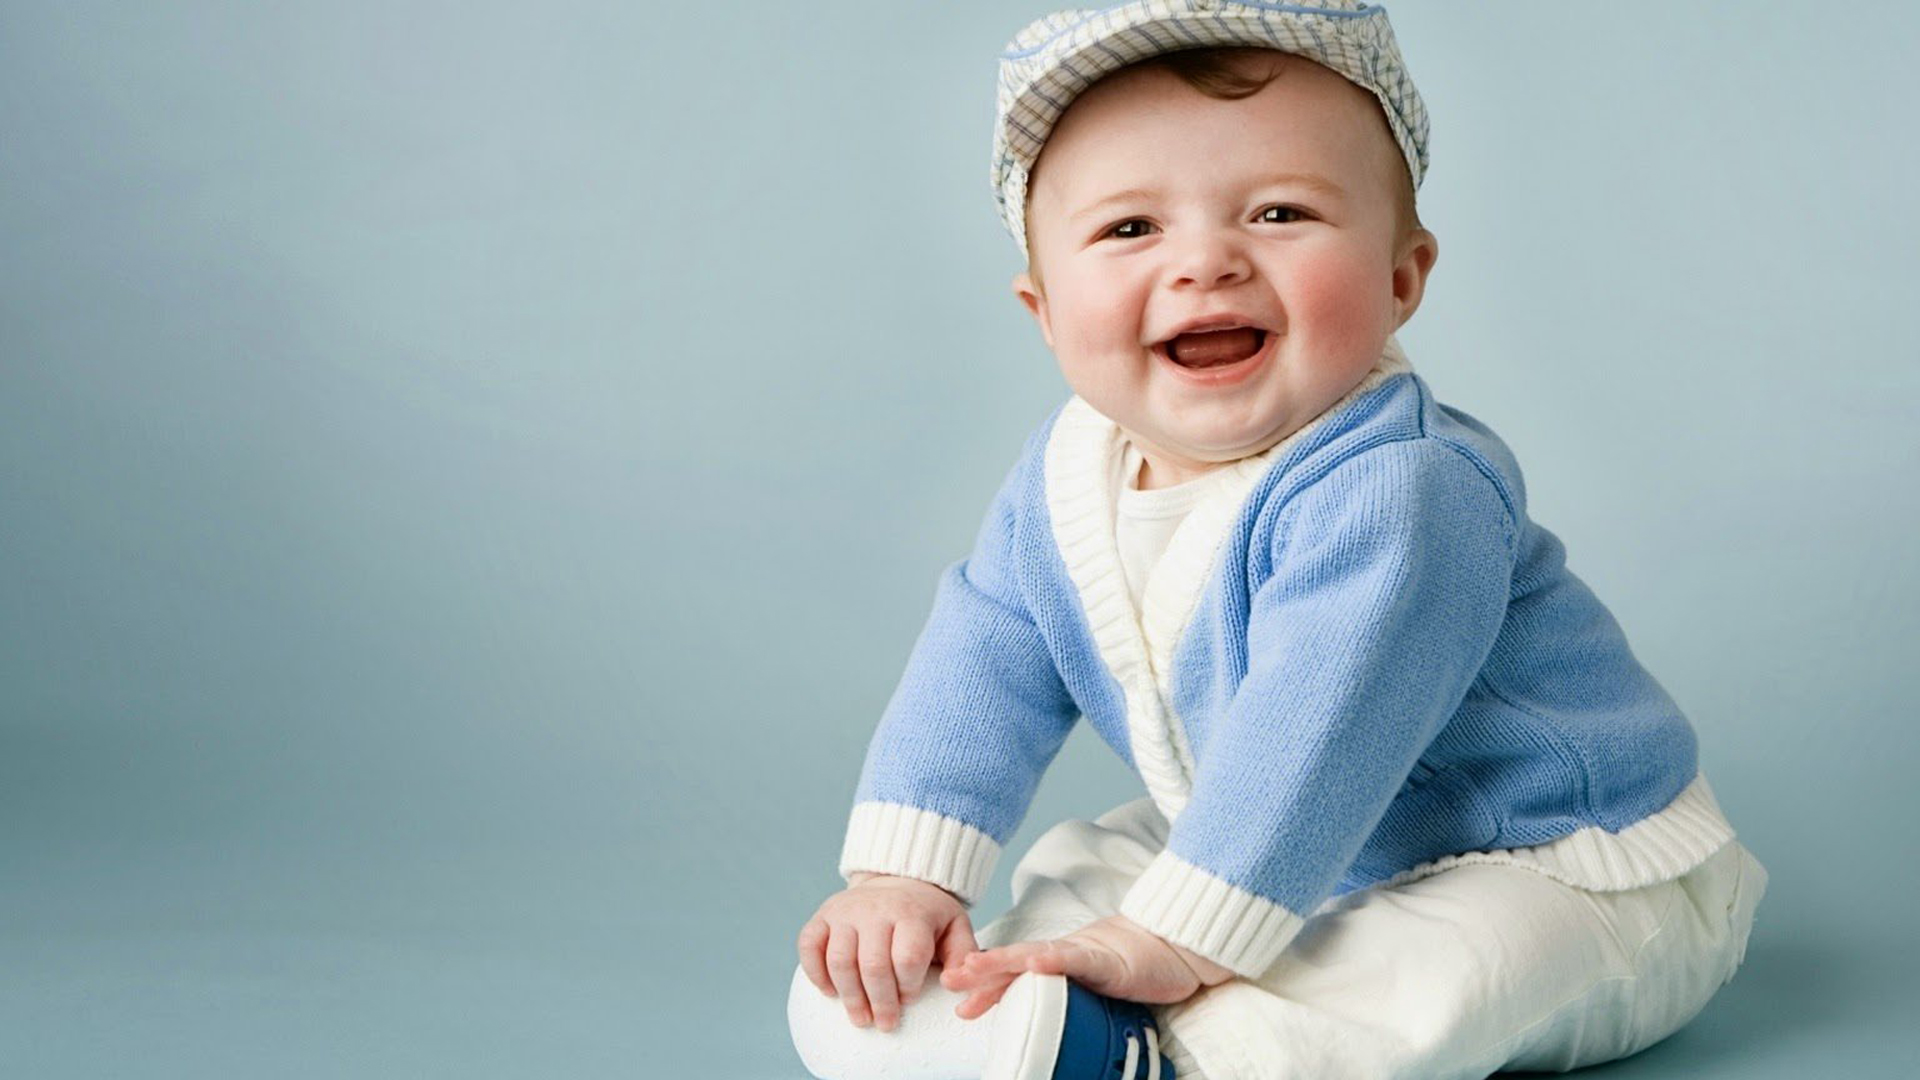 Smiley baby boy is sitting on floor wearing white dress and cap with blue woolen sweater in blue Wallpaper hd